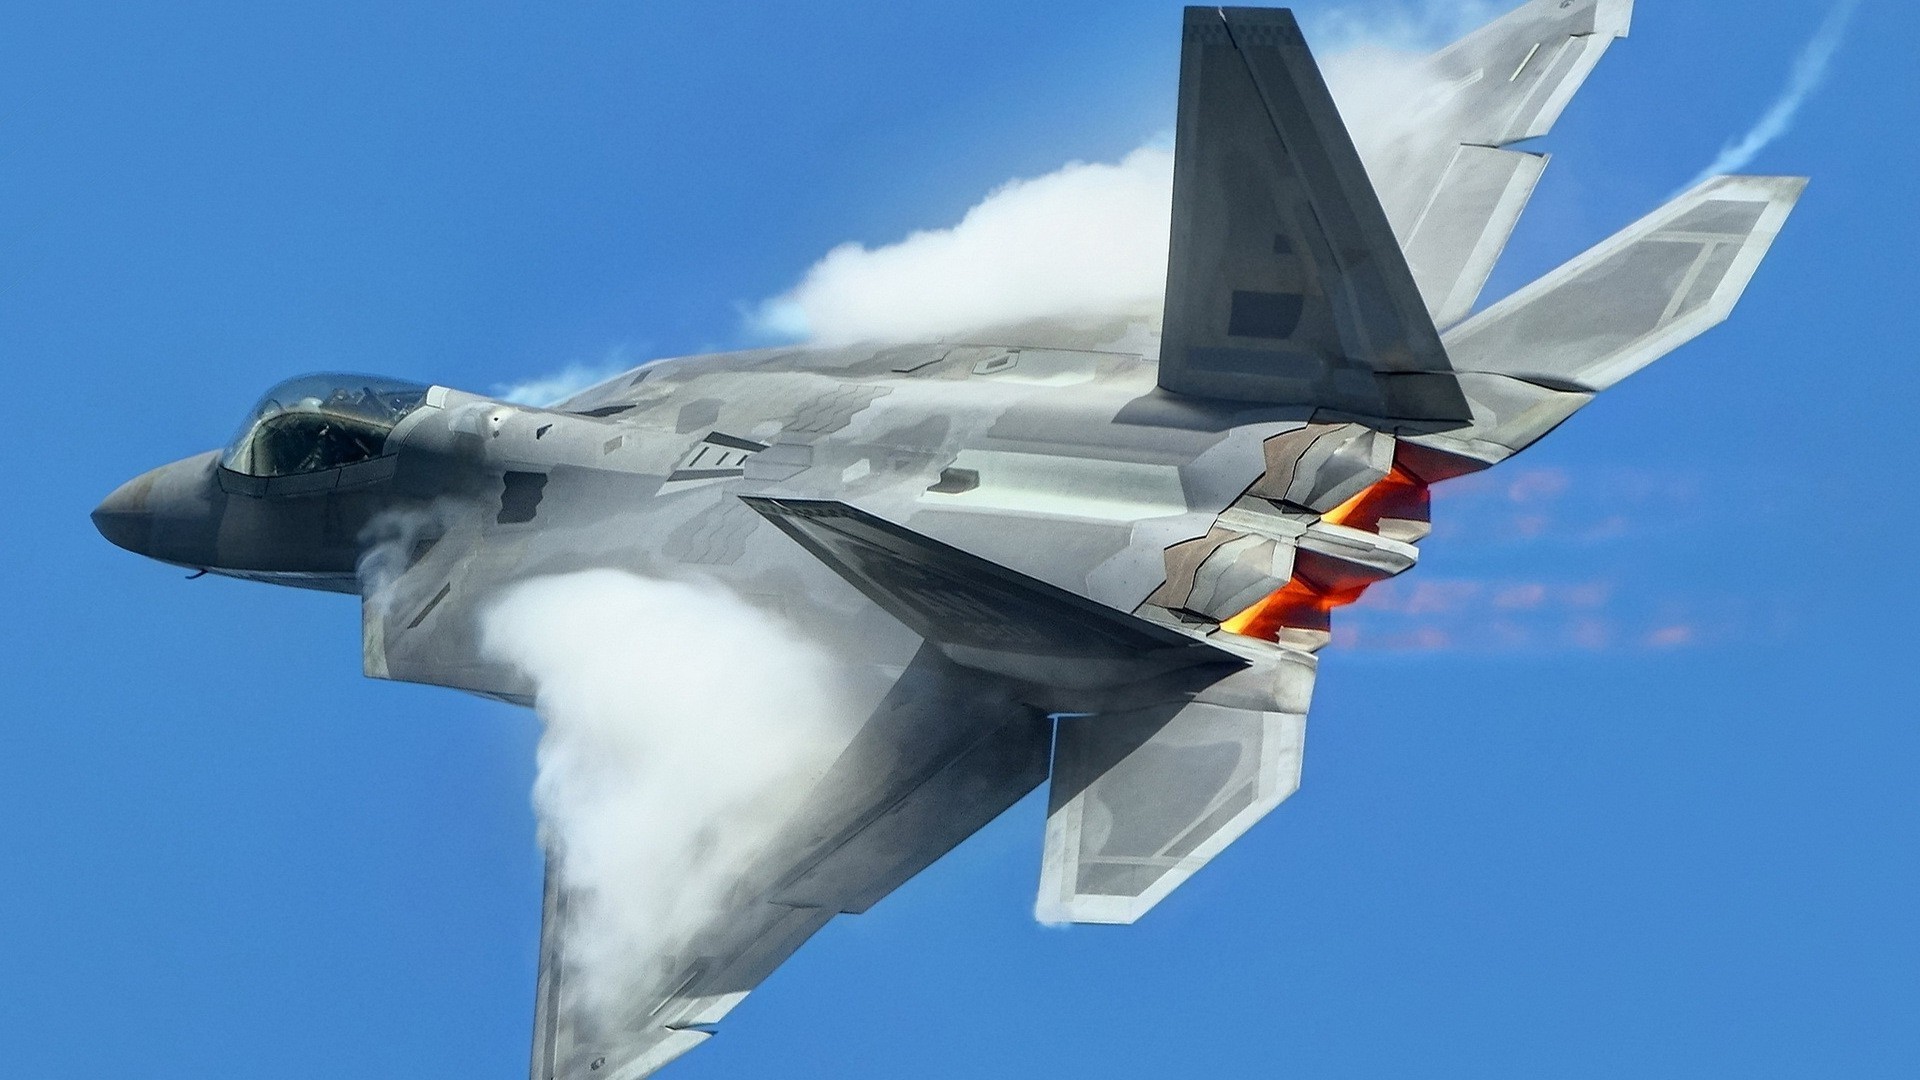 1920x1080 The F-22 Raptor Is Such a Badass Plane Stealth, speed, and air